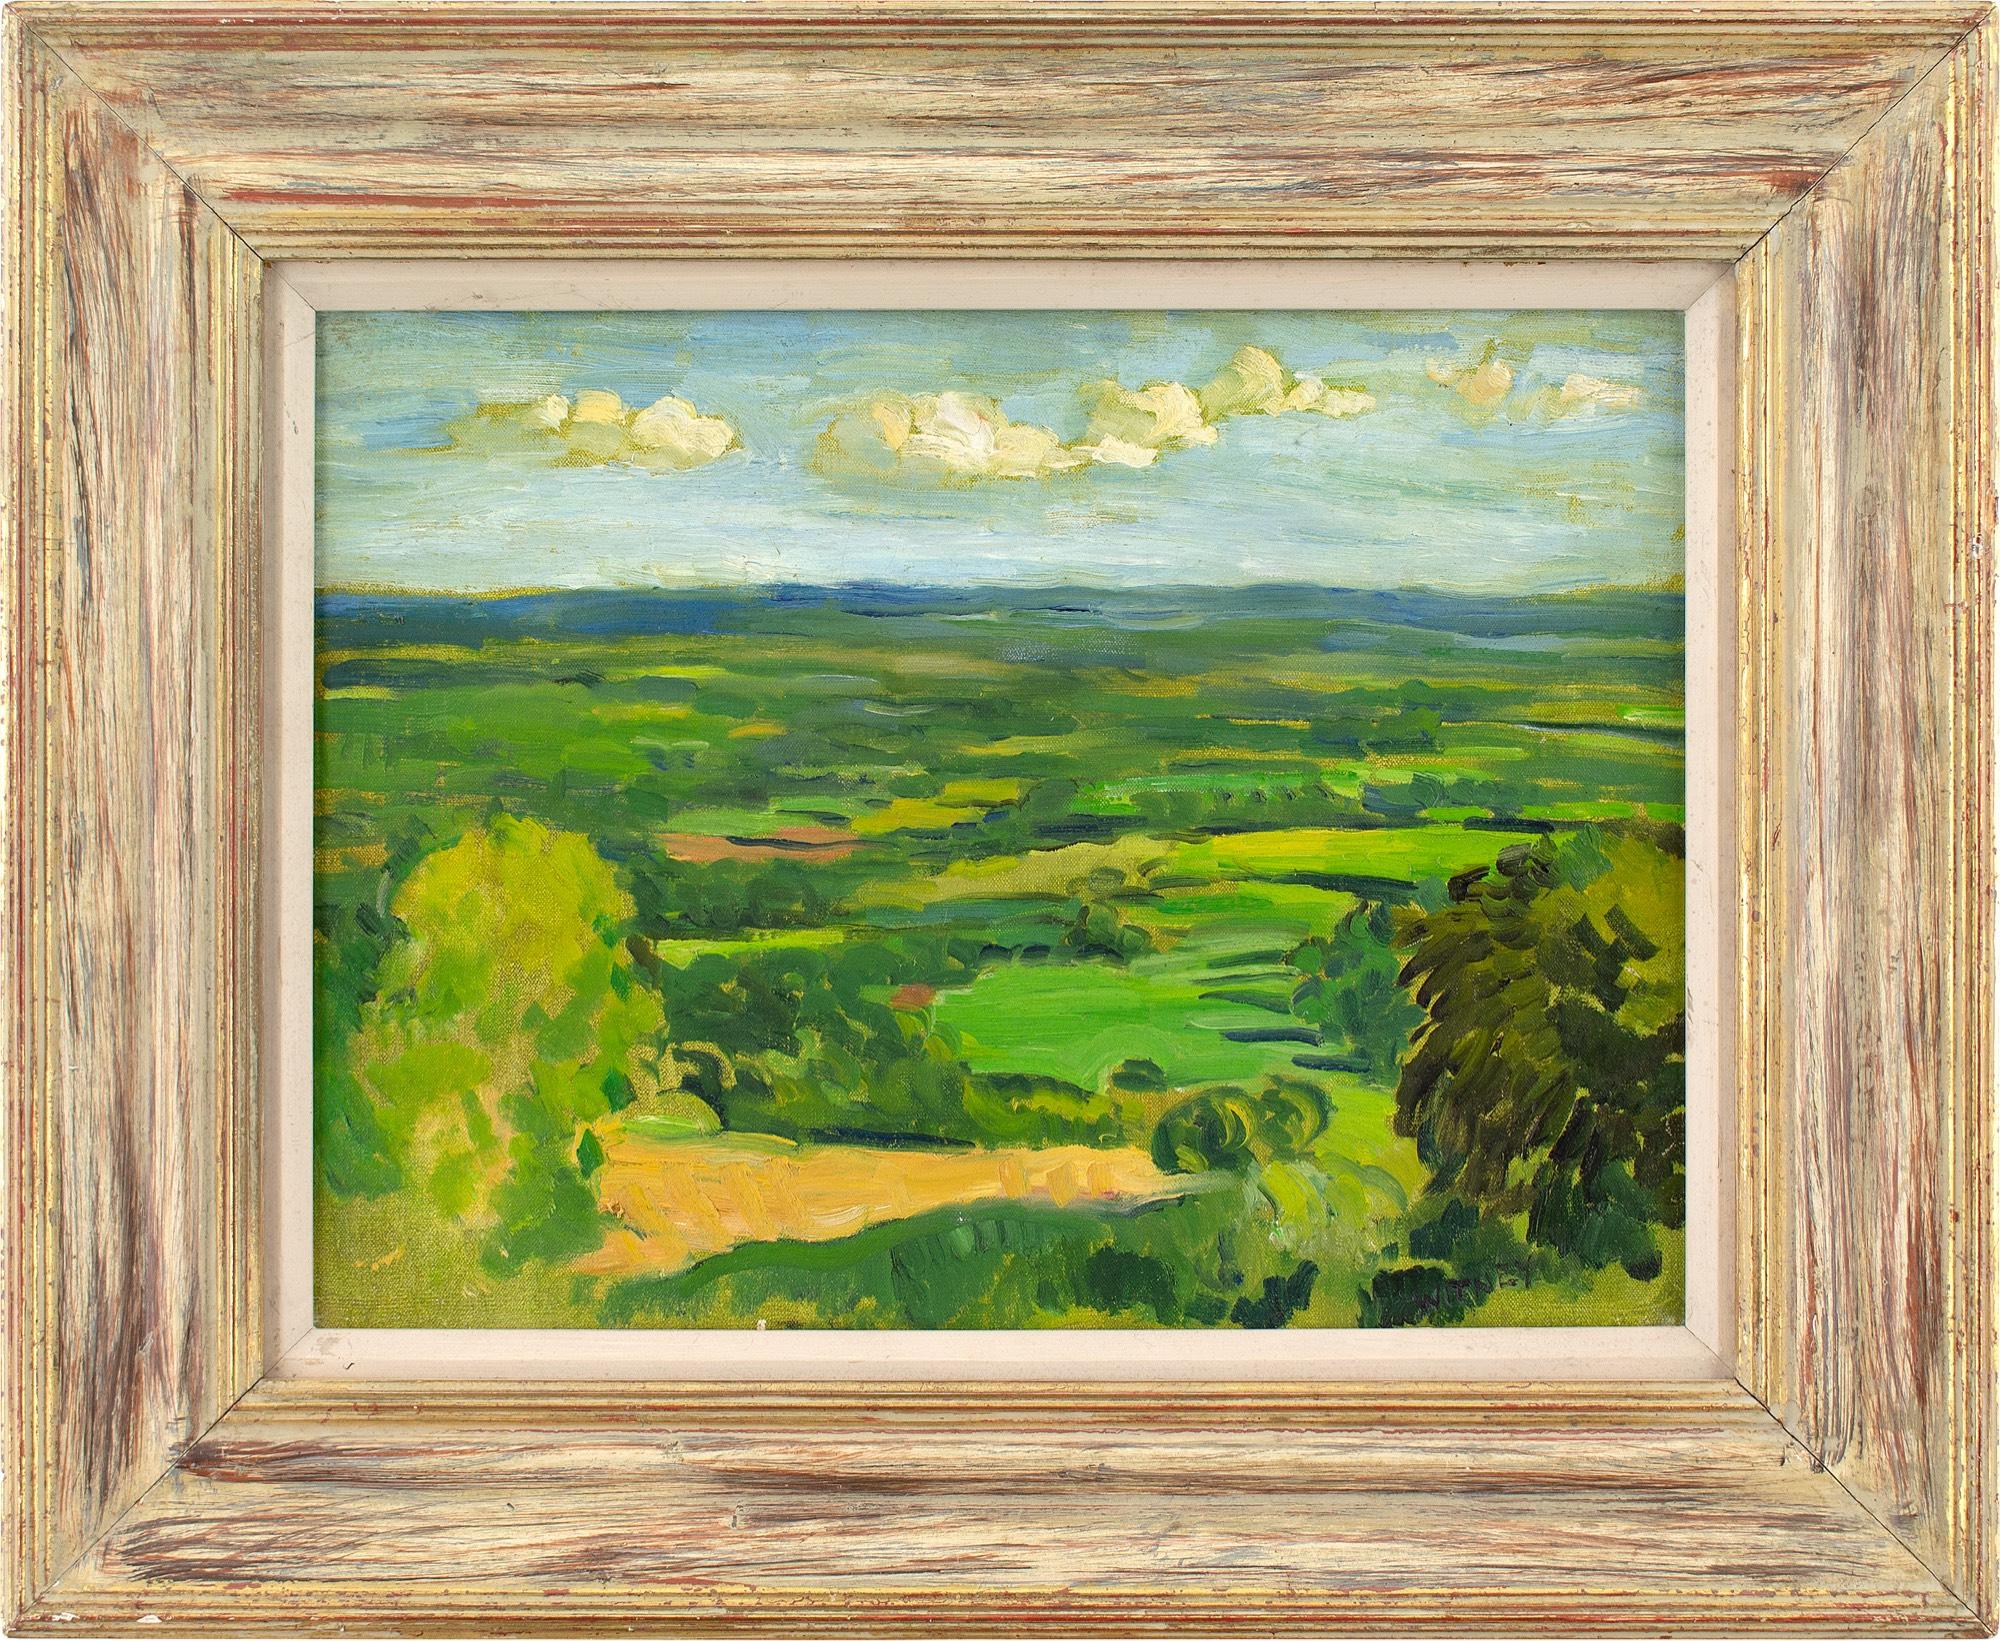 This picturesque 20th-century oil painting by British artist Alan Witney (1914-1996) depicts a view from the North Downs in Kent.

Witney’s early years were spent in India where his father worked as a Christian missionary. One can imagine that the